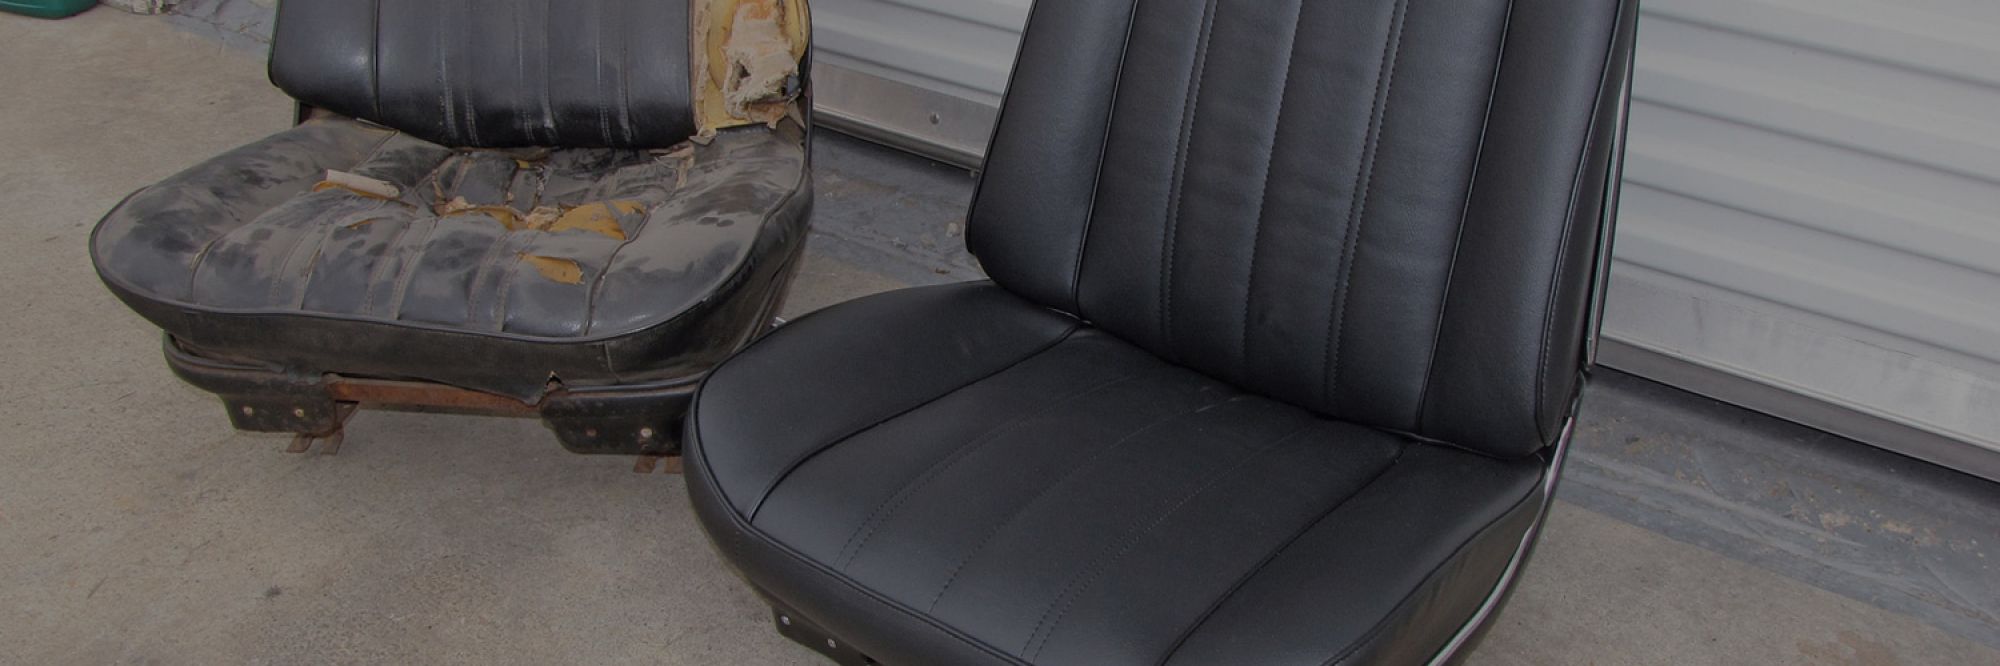 <big><bold>Auto Upholstery Shop</big></bold><br> <small>Proudly servicing Regina & area since 1984</small>